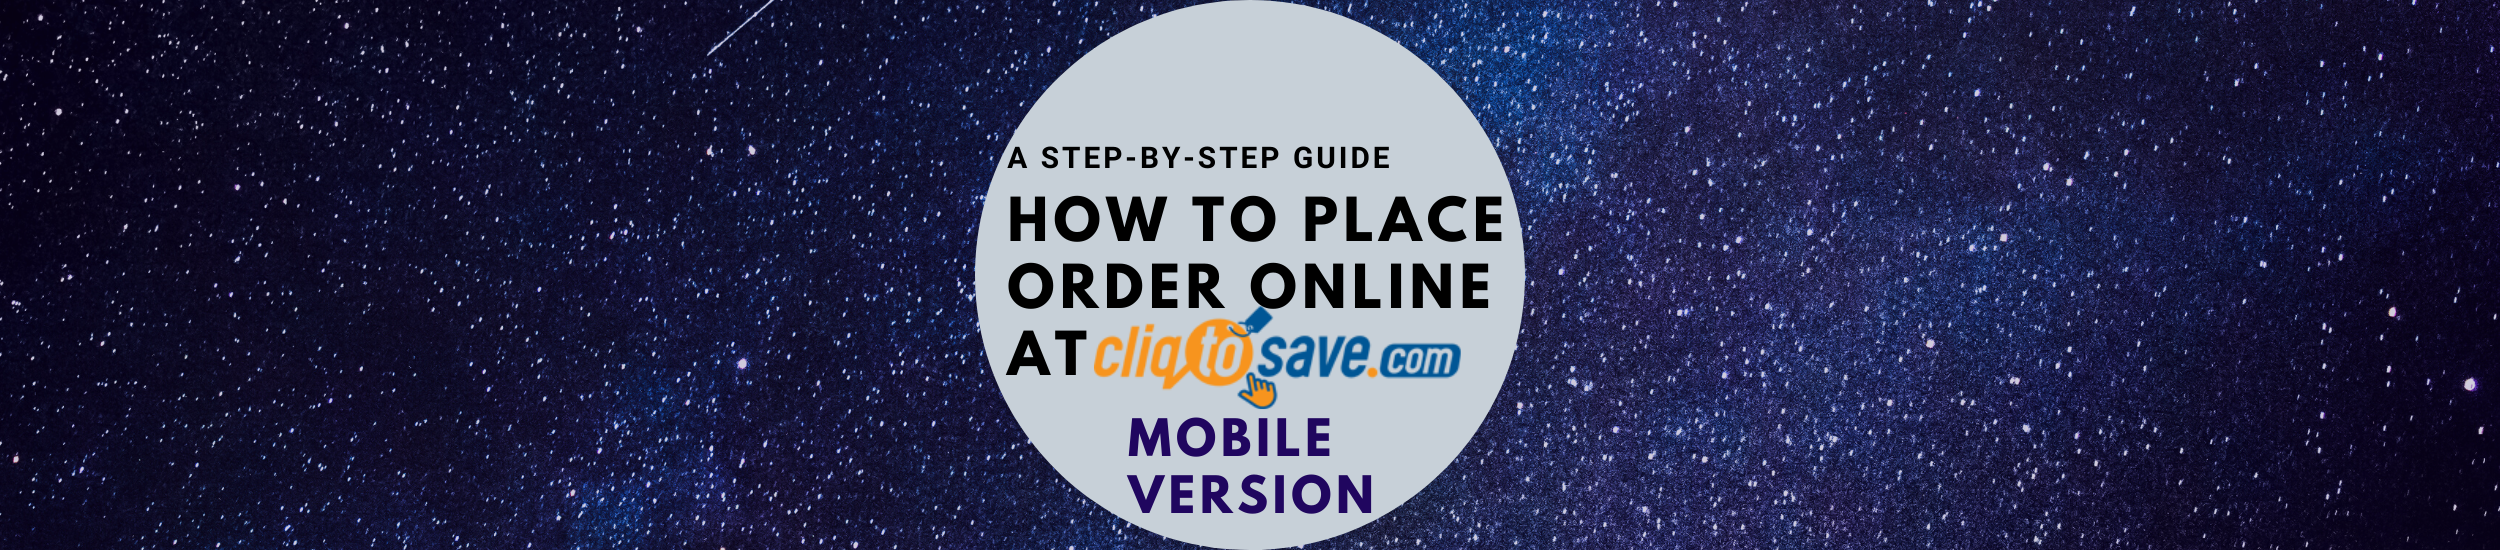 How to Place Order at Cliqtosave (Mobile Version)